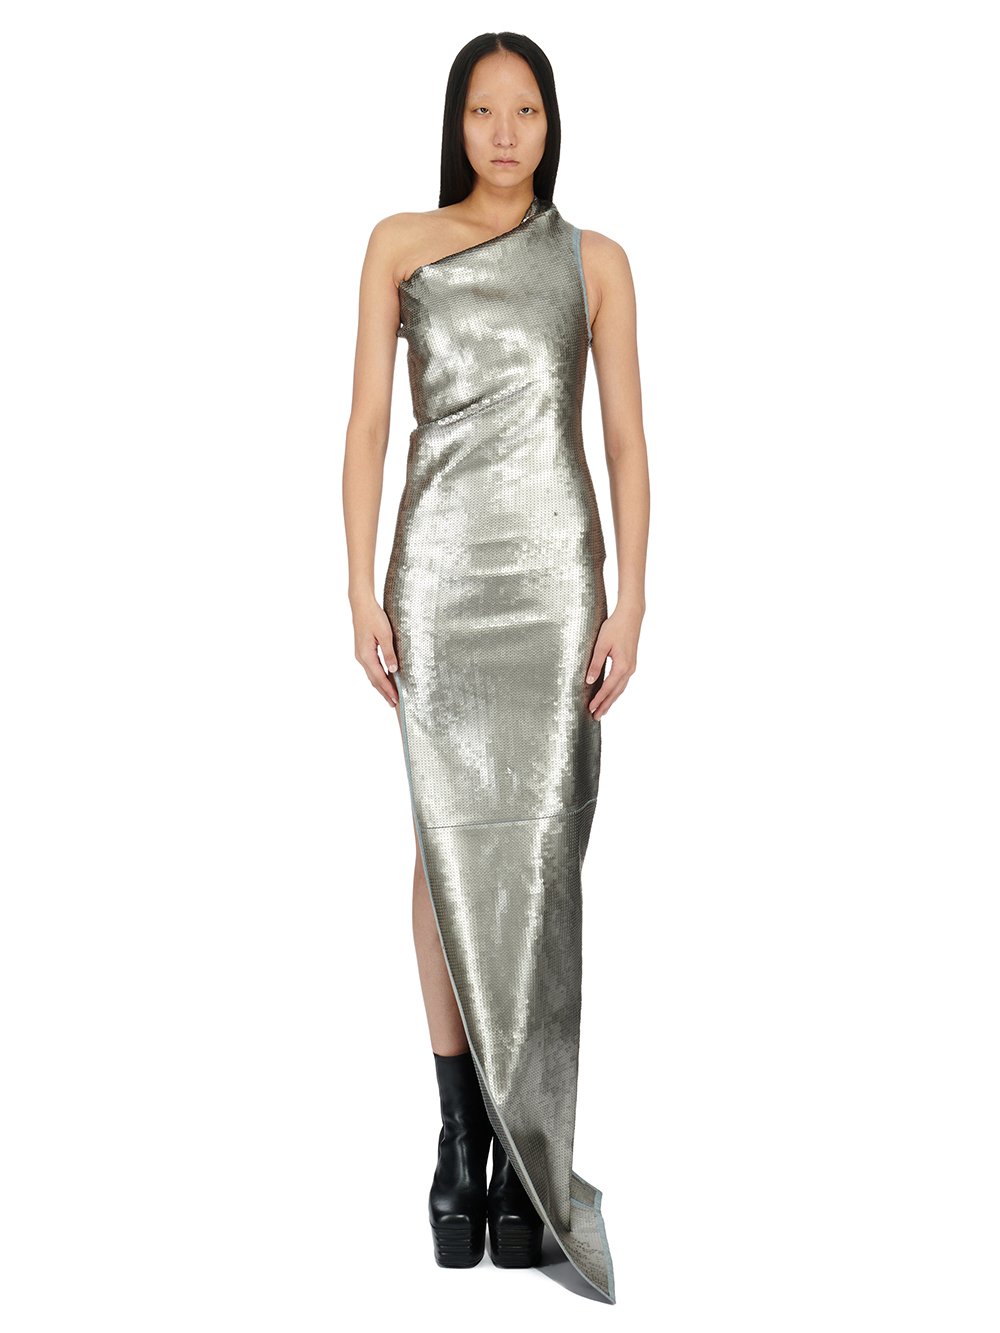 RICK OWENS FW23 LUXOR ATHENA GOWN IN BLUE AND PEARL SEQUIN EMBROIDERED STRETCH DENIM